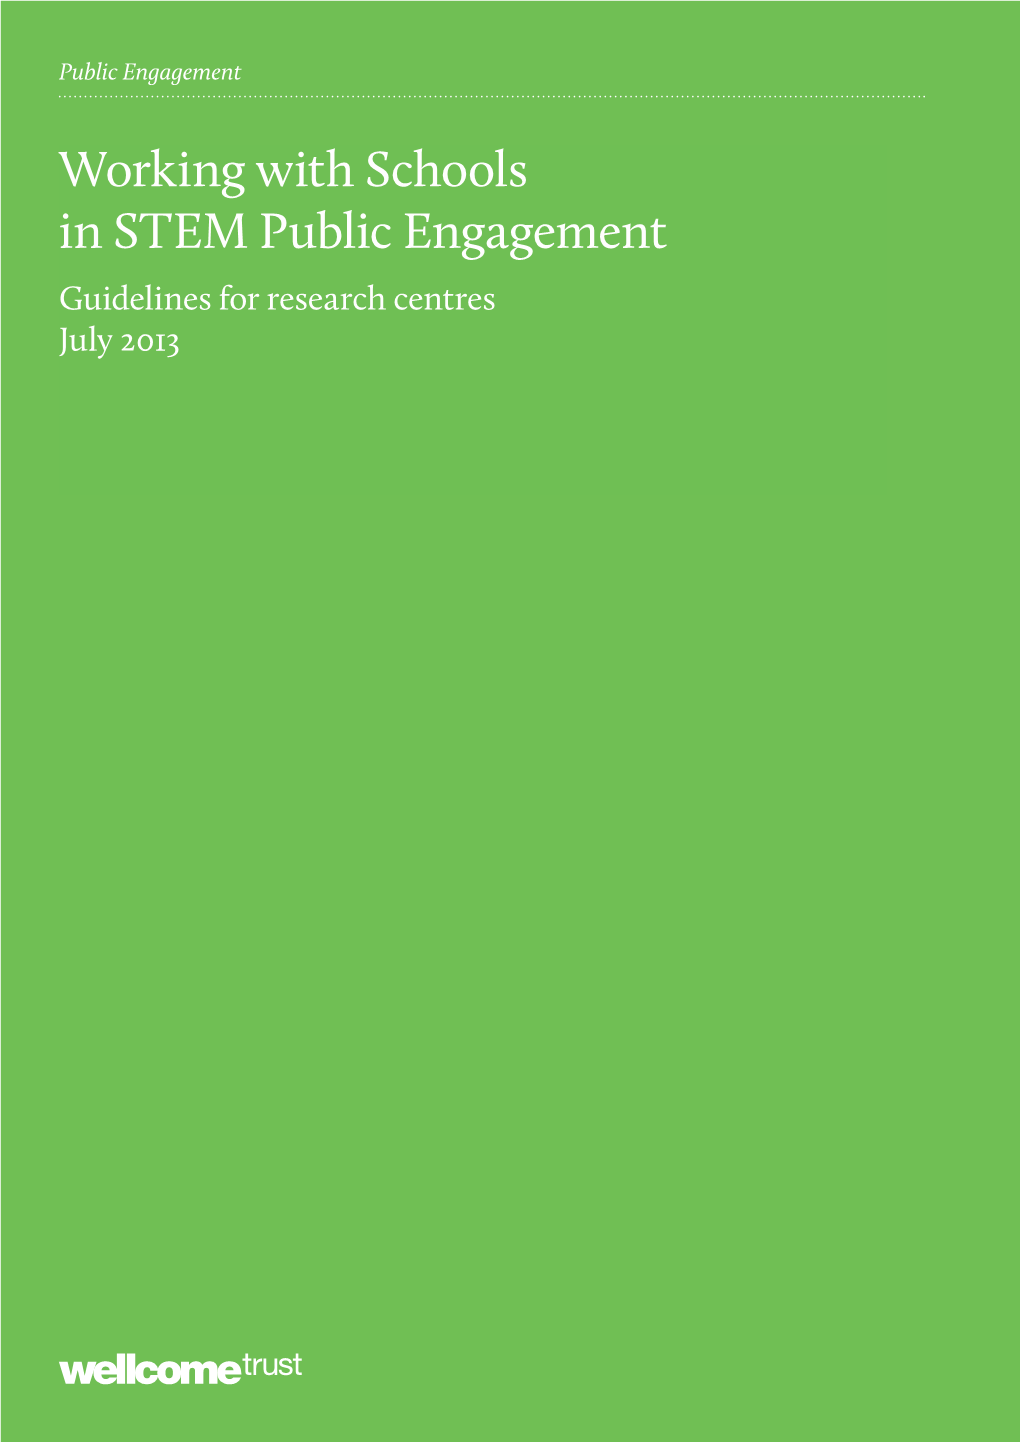 Working with Schools in STEM Public Engagement: Guidelines